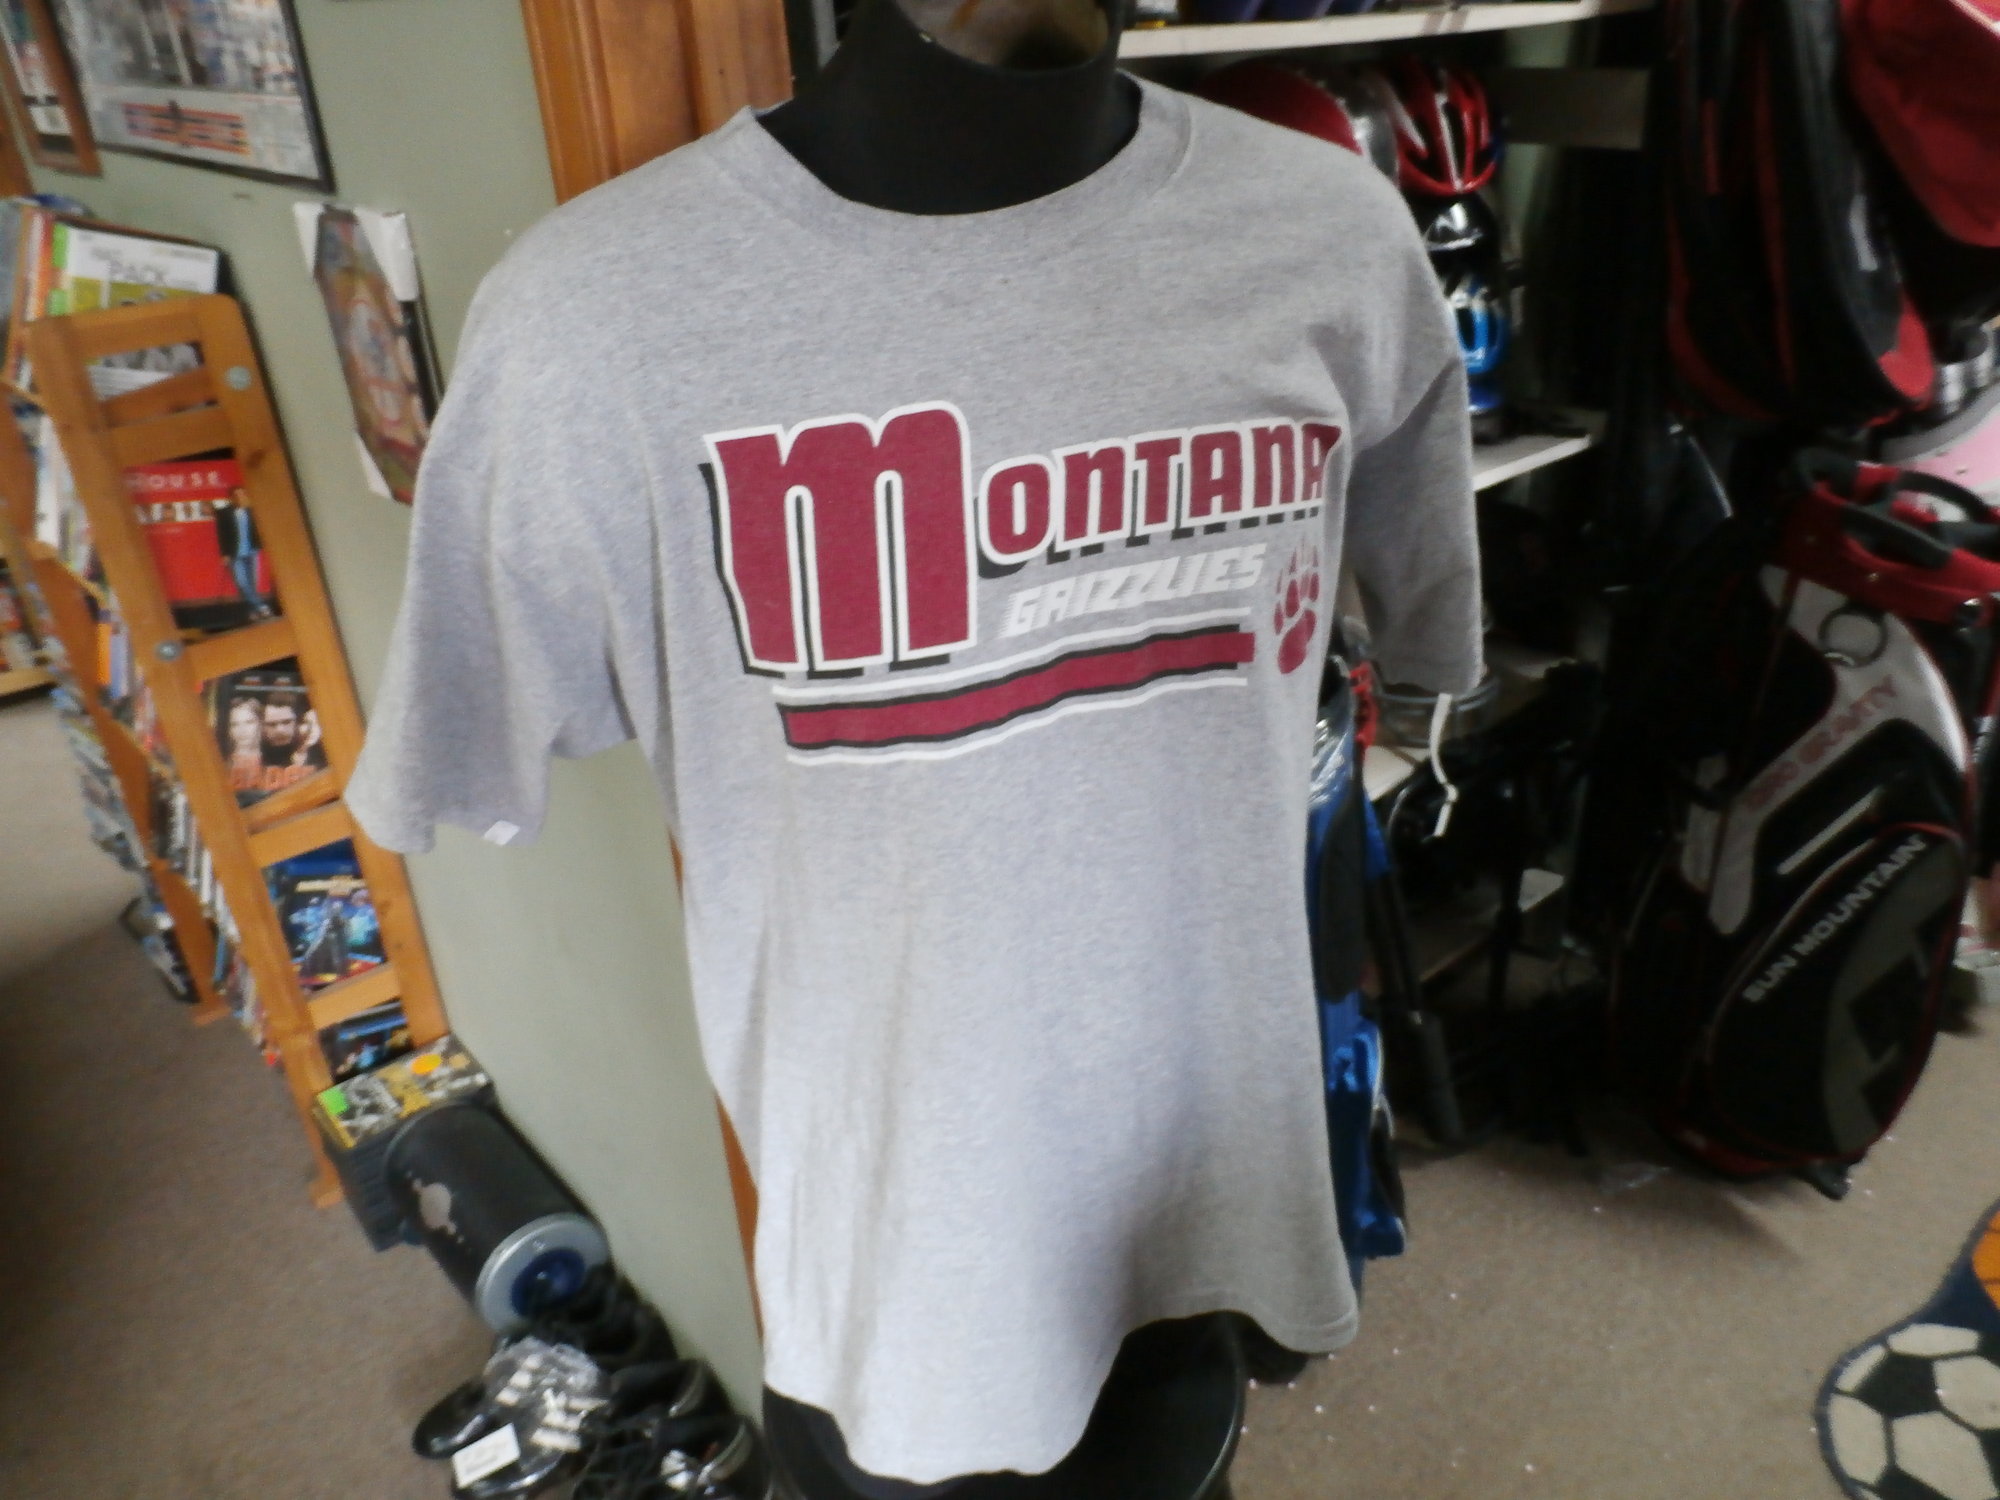 Montana Grizzlies Men's T shirt gray size Large cotton blend #20346
Rating: (see below) 4 - Fair Condition
Team: Montana Grizzlies
Player:  Team
Brand: Greatshirts
Size : Large- Men's (Chest: 21.5\" ; Length: 29\" ) armpit to armpit & shoulder to hem
Color: Gray
Style: T Shirt; screen pressed
Material: 90% Cotton; 10% Polyester
Condition: 4 - Fair Condition - wrinkled; light pilling and fuzz; stretched from wear and wash; neck is stretched out from use; the fabric is faded and discolored; logo has slight cracking and wearing; 2 tiny small brown stains at the front of the neck; has a worn look to it
Item #: 20346
Shipping: FREE